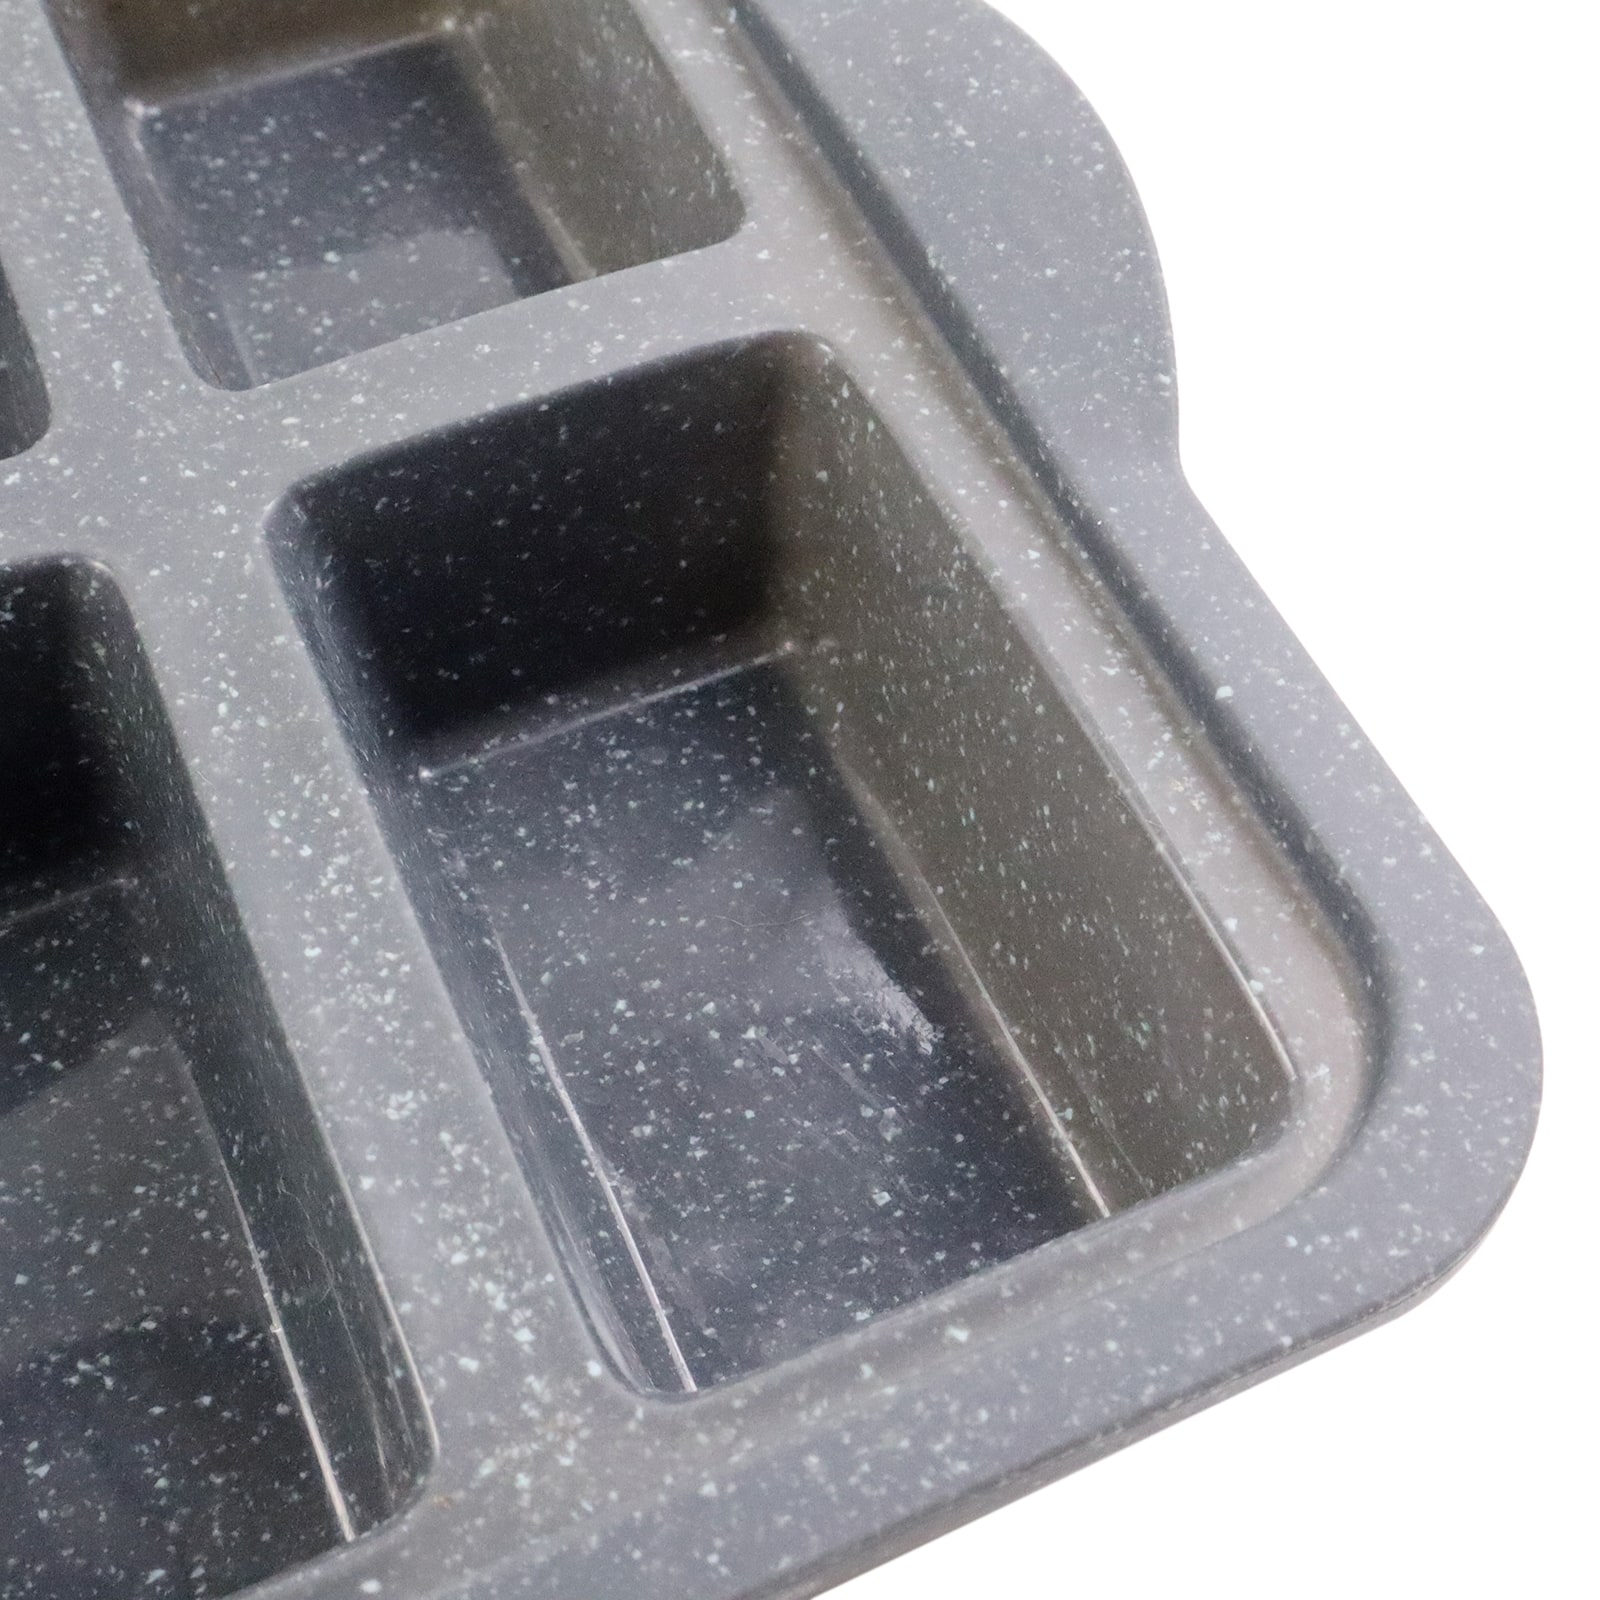 8-Cavity Metal-Reinforced Silicone Mini Loaf Pan by Celebrate It